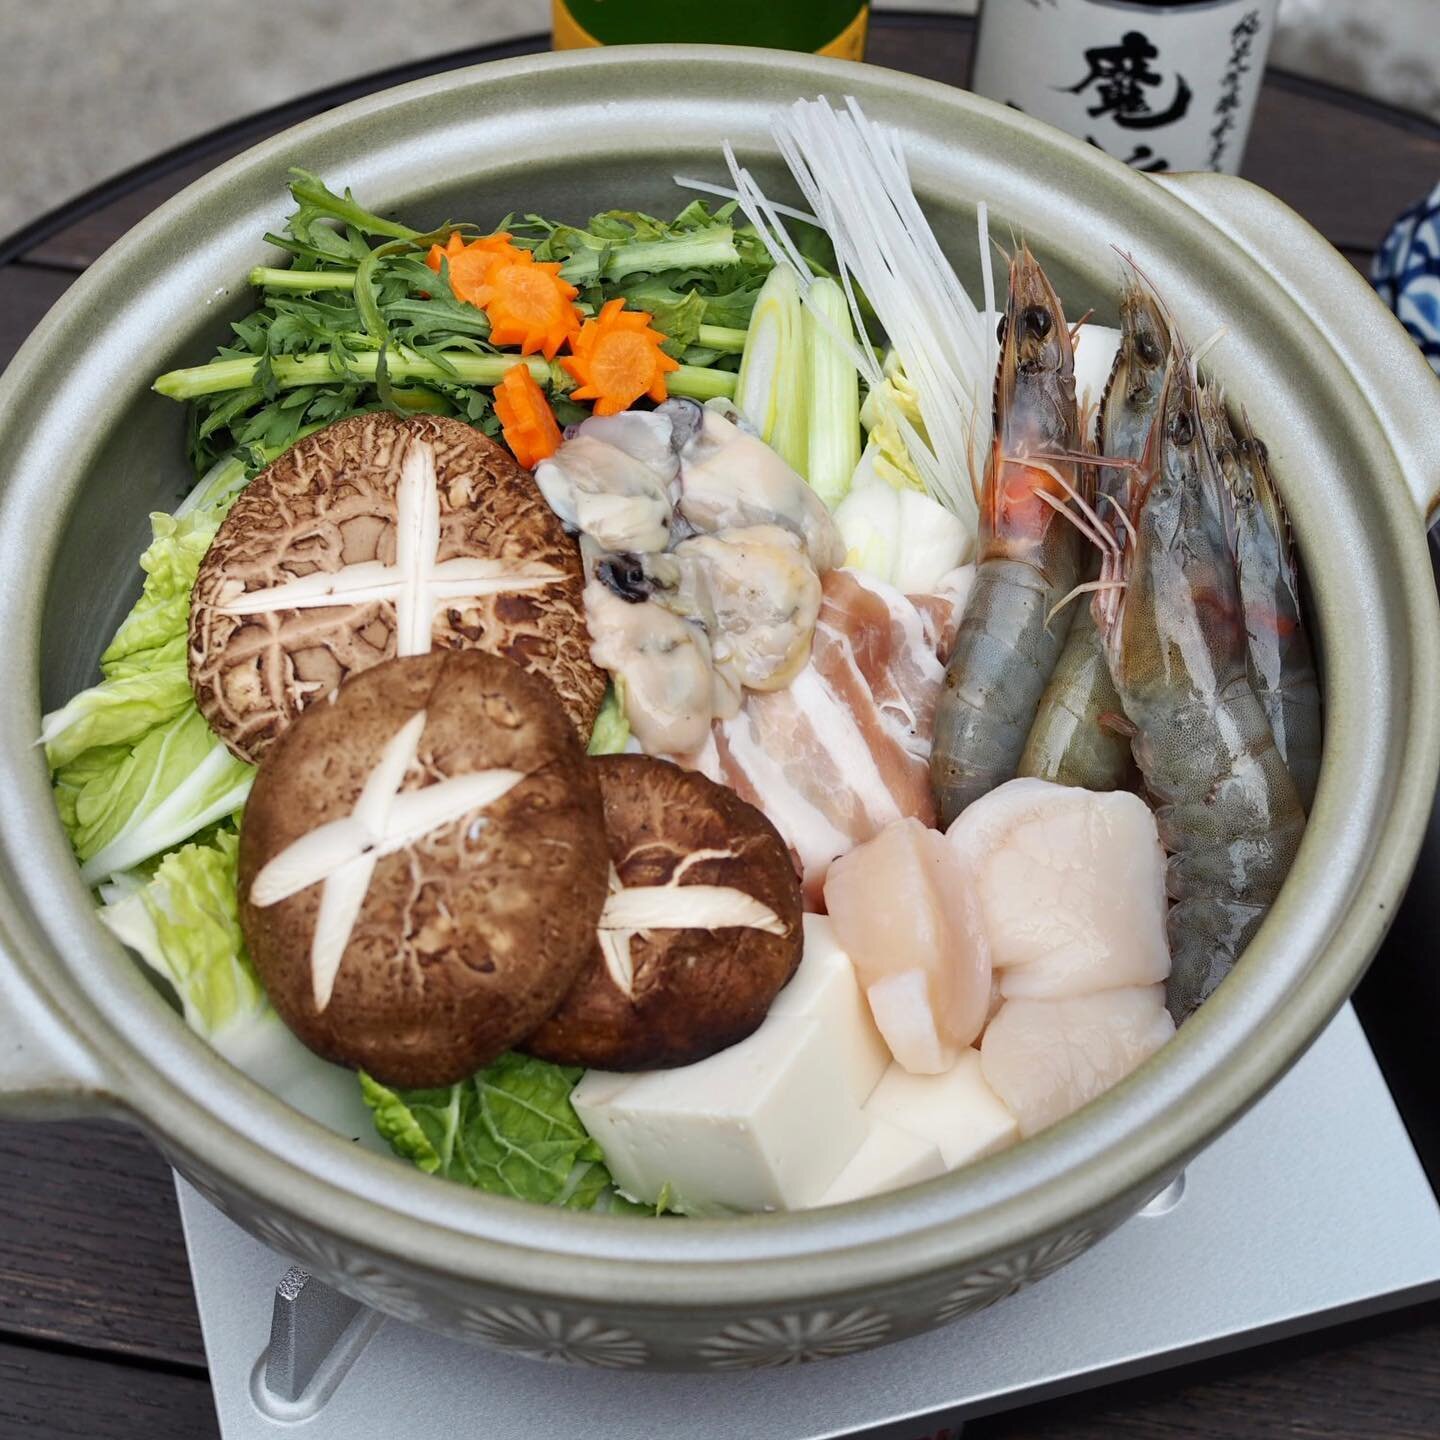 🍲 EE NAMI Seafood Hot Pot Special 🦐 🦪 
Come dine at EE NAMI to enjoy our seasonal hot pot &ldquo;nabe&rdquo; dinner! Hot pot is now available for parties of 4 or more at $18 per person. Ingredients include shrimp, scallops, oysters, pork belly, to